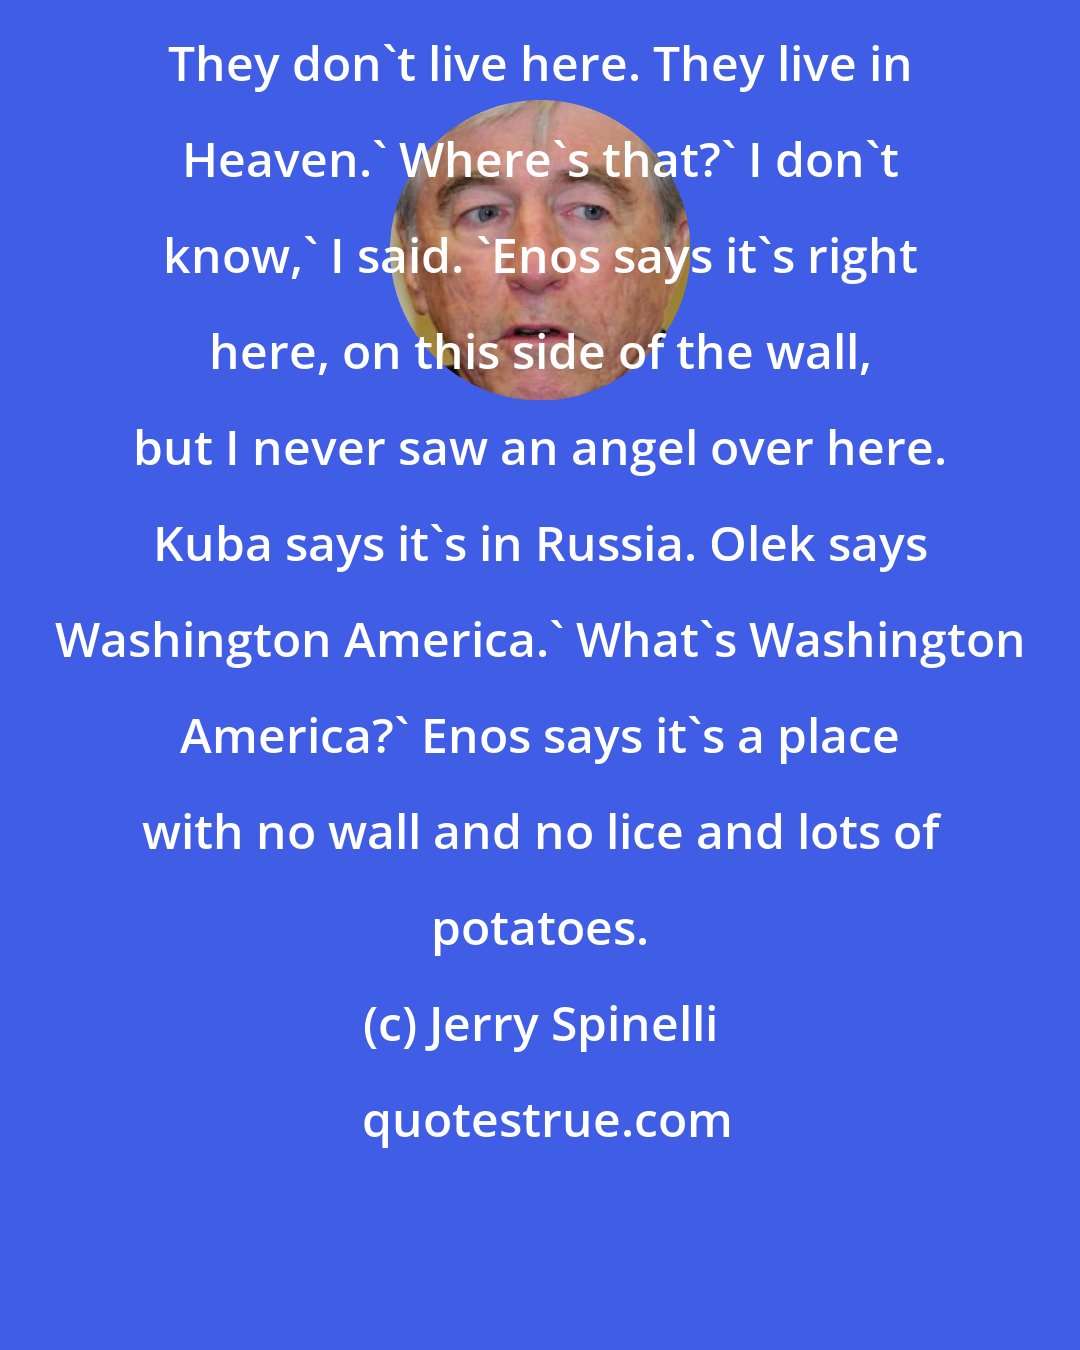 Jerry Spinelli: They don't live here. They live in Heaven.' Where's that?' I don't know,' I said. 'Enos says it's right here, on this side of the wall, but I never saw an angel over here. Kuba says it's in Russia. Olek says Washington America.' What's Washington America?' Enos says it's a place with no wall and no lice and lots of potatoes.